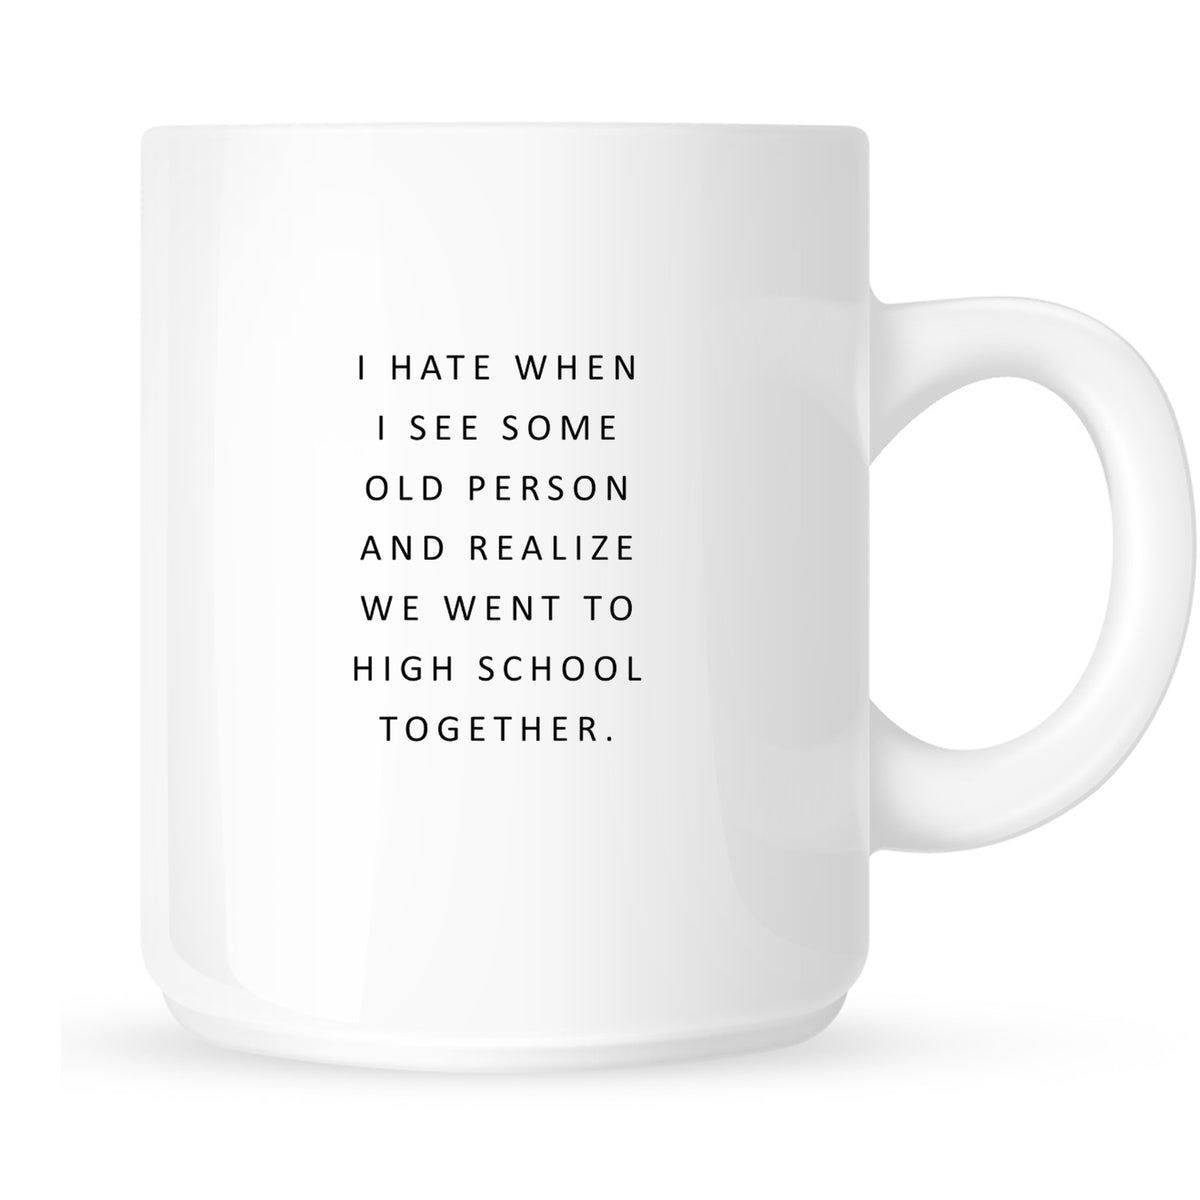 Mug - I Hate It When I See Some Old Person and Realize We Went to High School Together